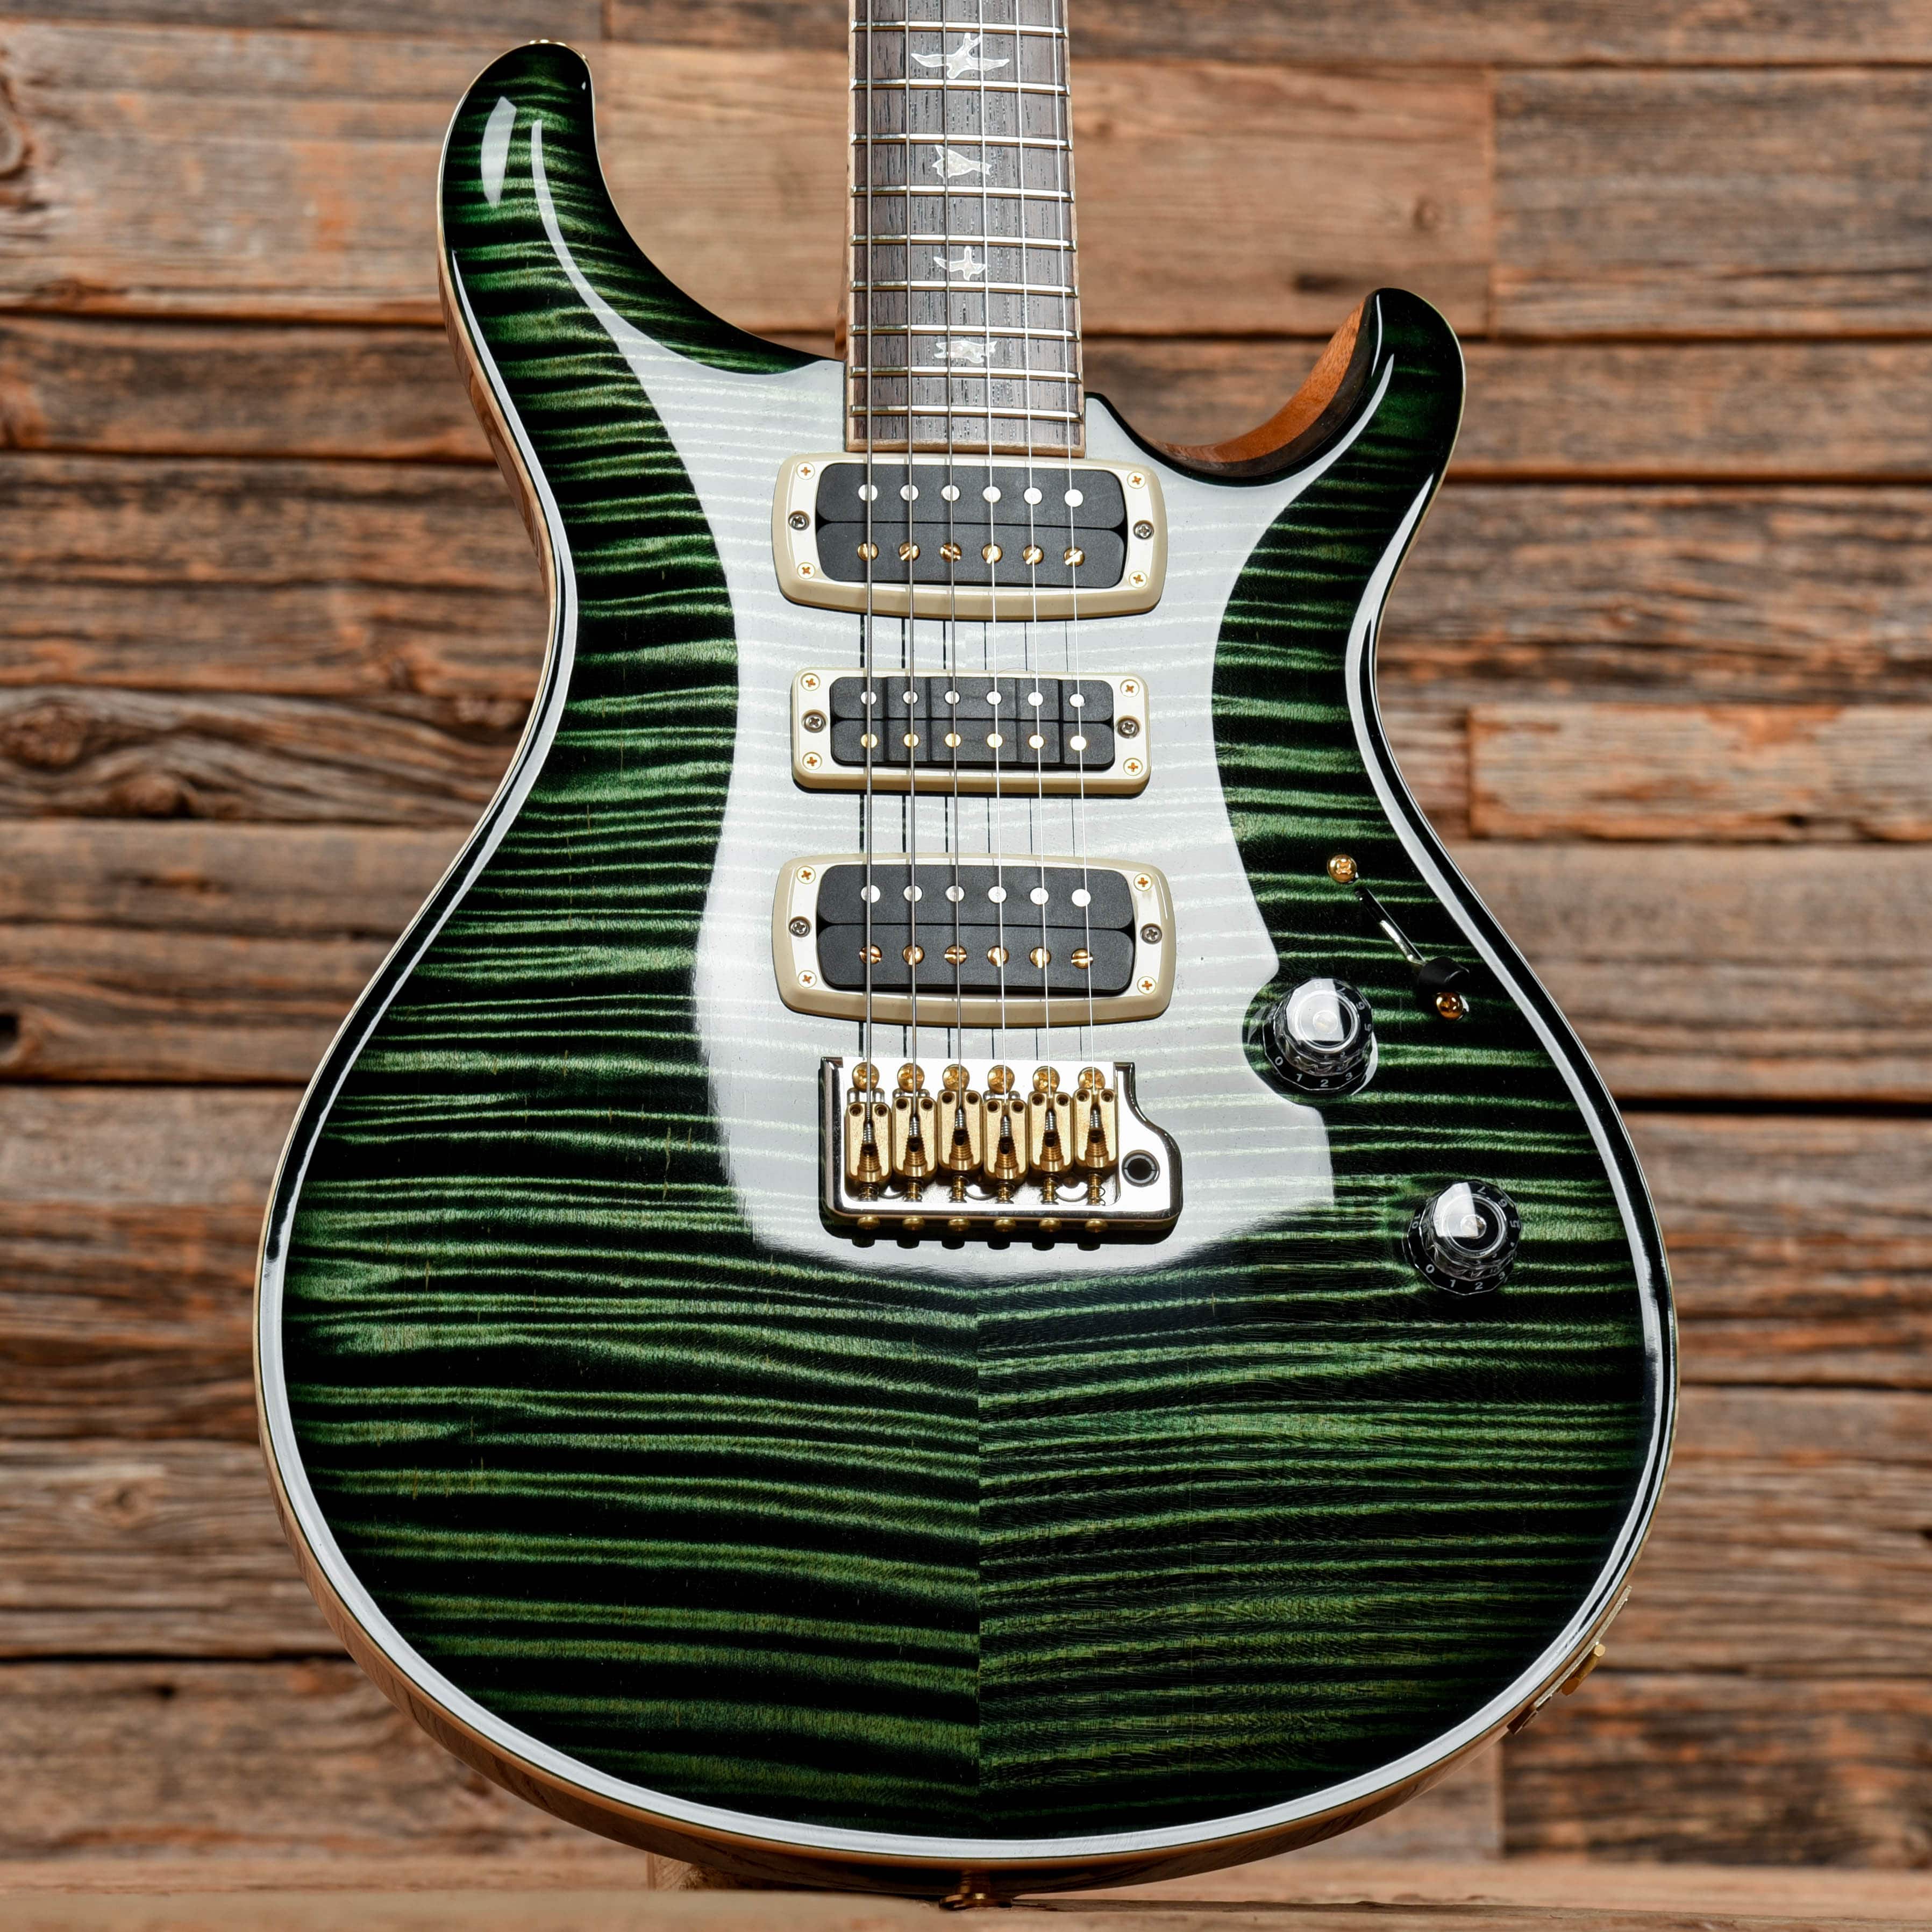 PRS 20th Anniversary Limited Private Stock Sage Smoke Burst 2016 Electric Guitars / Solid Body